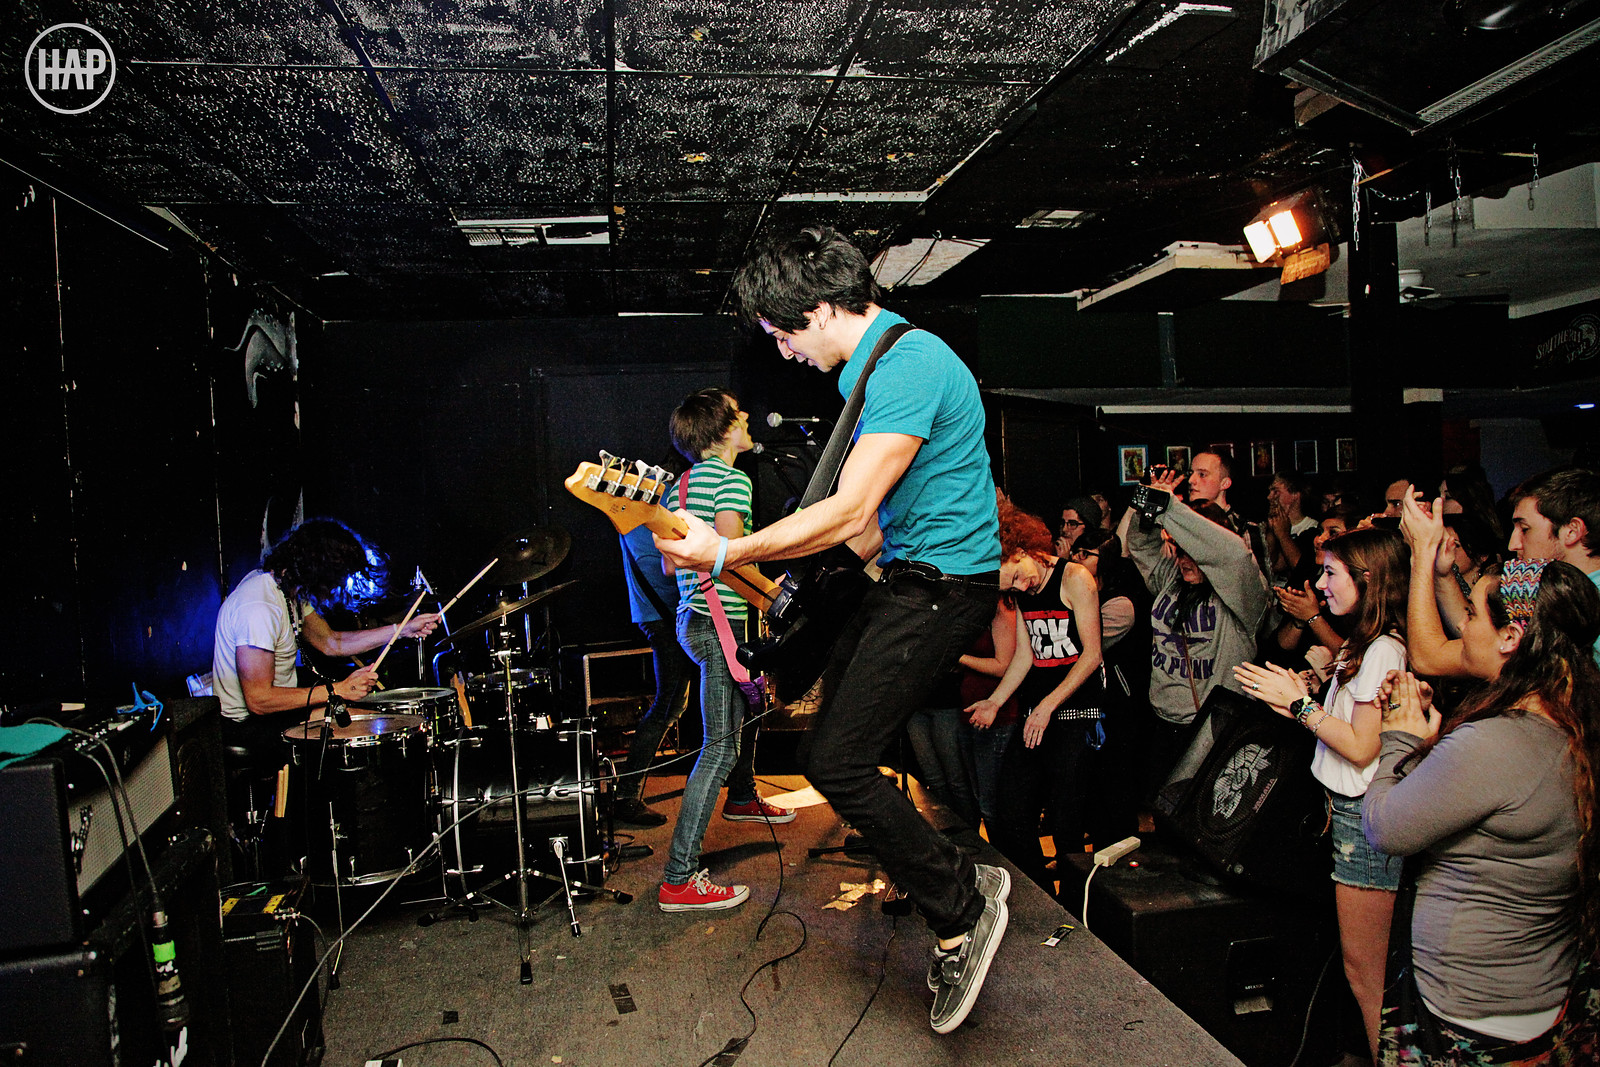 11-17-12 Jawn performing with Waterparks at Mango's Cafe in Houston, Texas by Heather Ann Phillips on Flickr